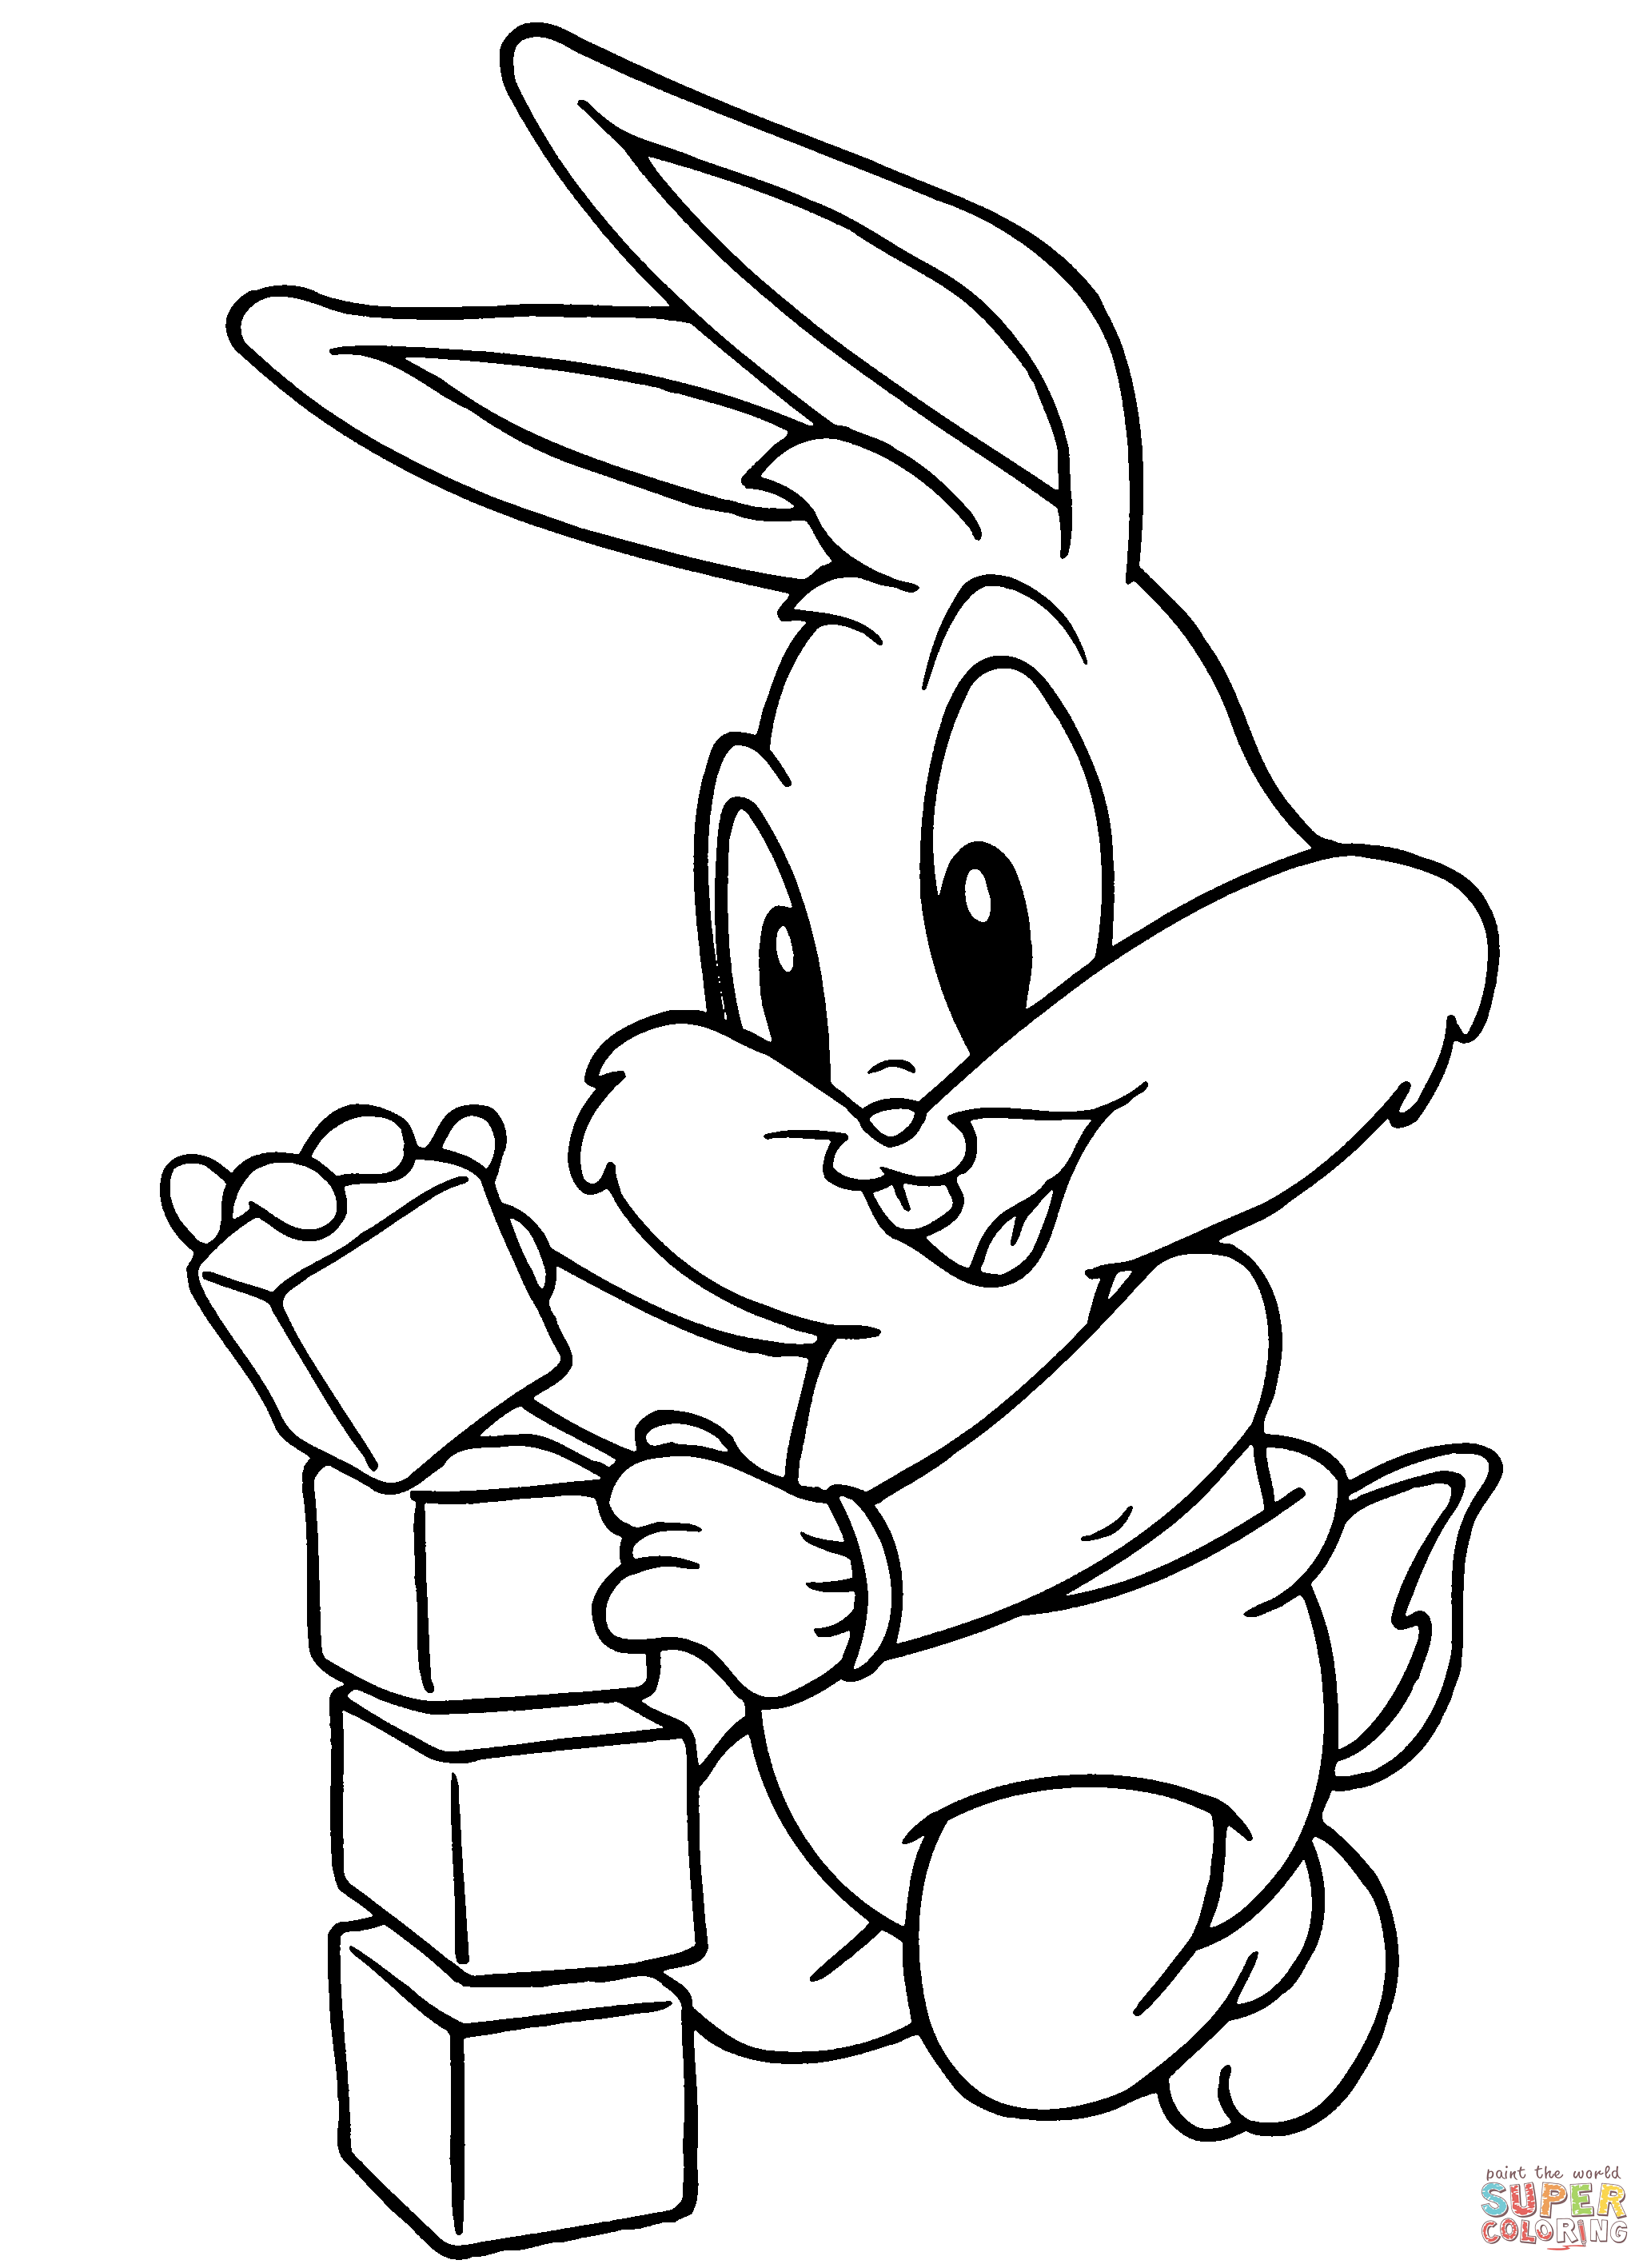 bugs bunny coloring page looney tunes spot coloring pages bugs